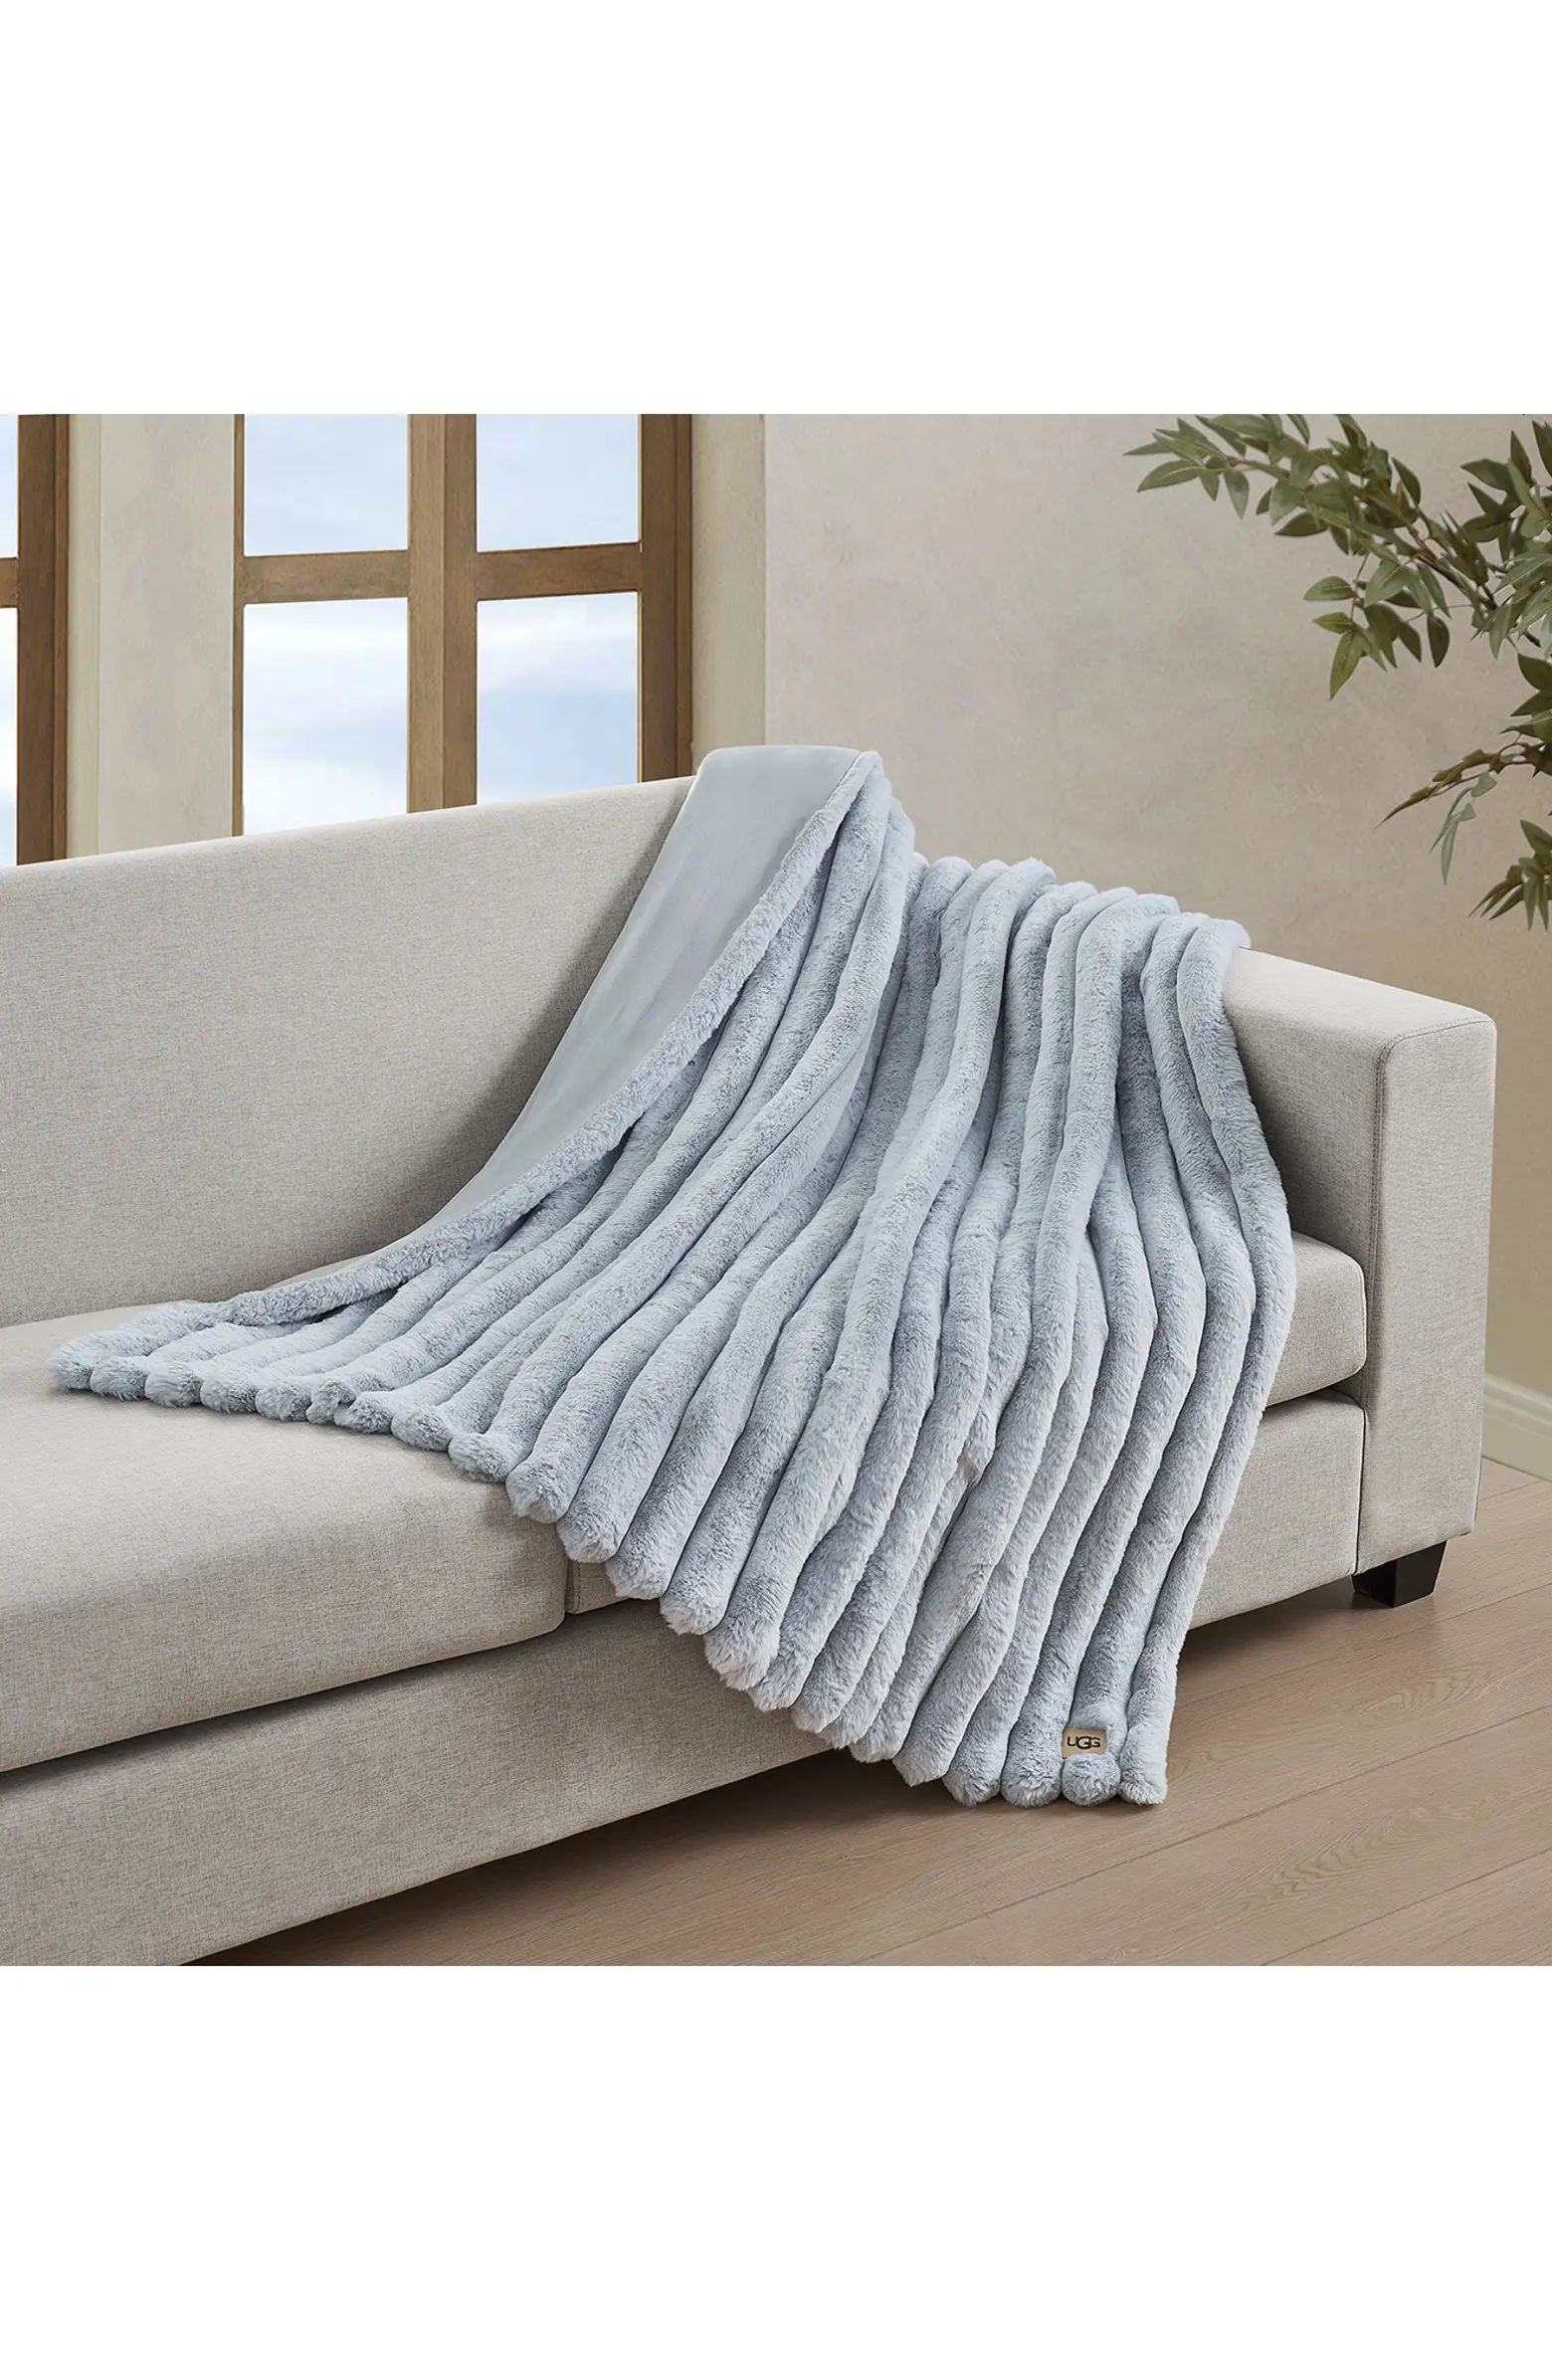 Channel Quilt Faux Fur Throw Blanket | Nordstrom